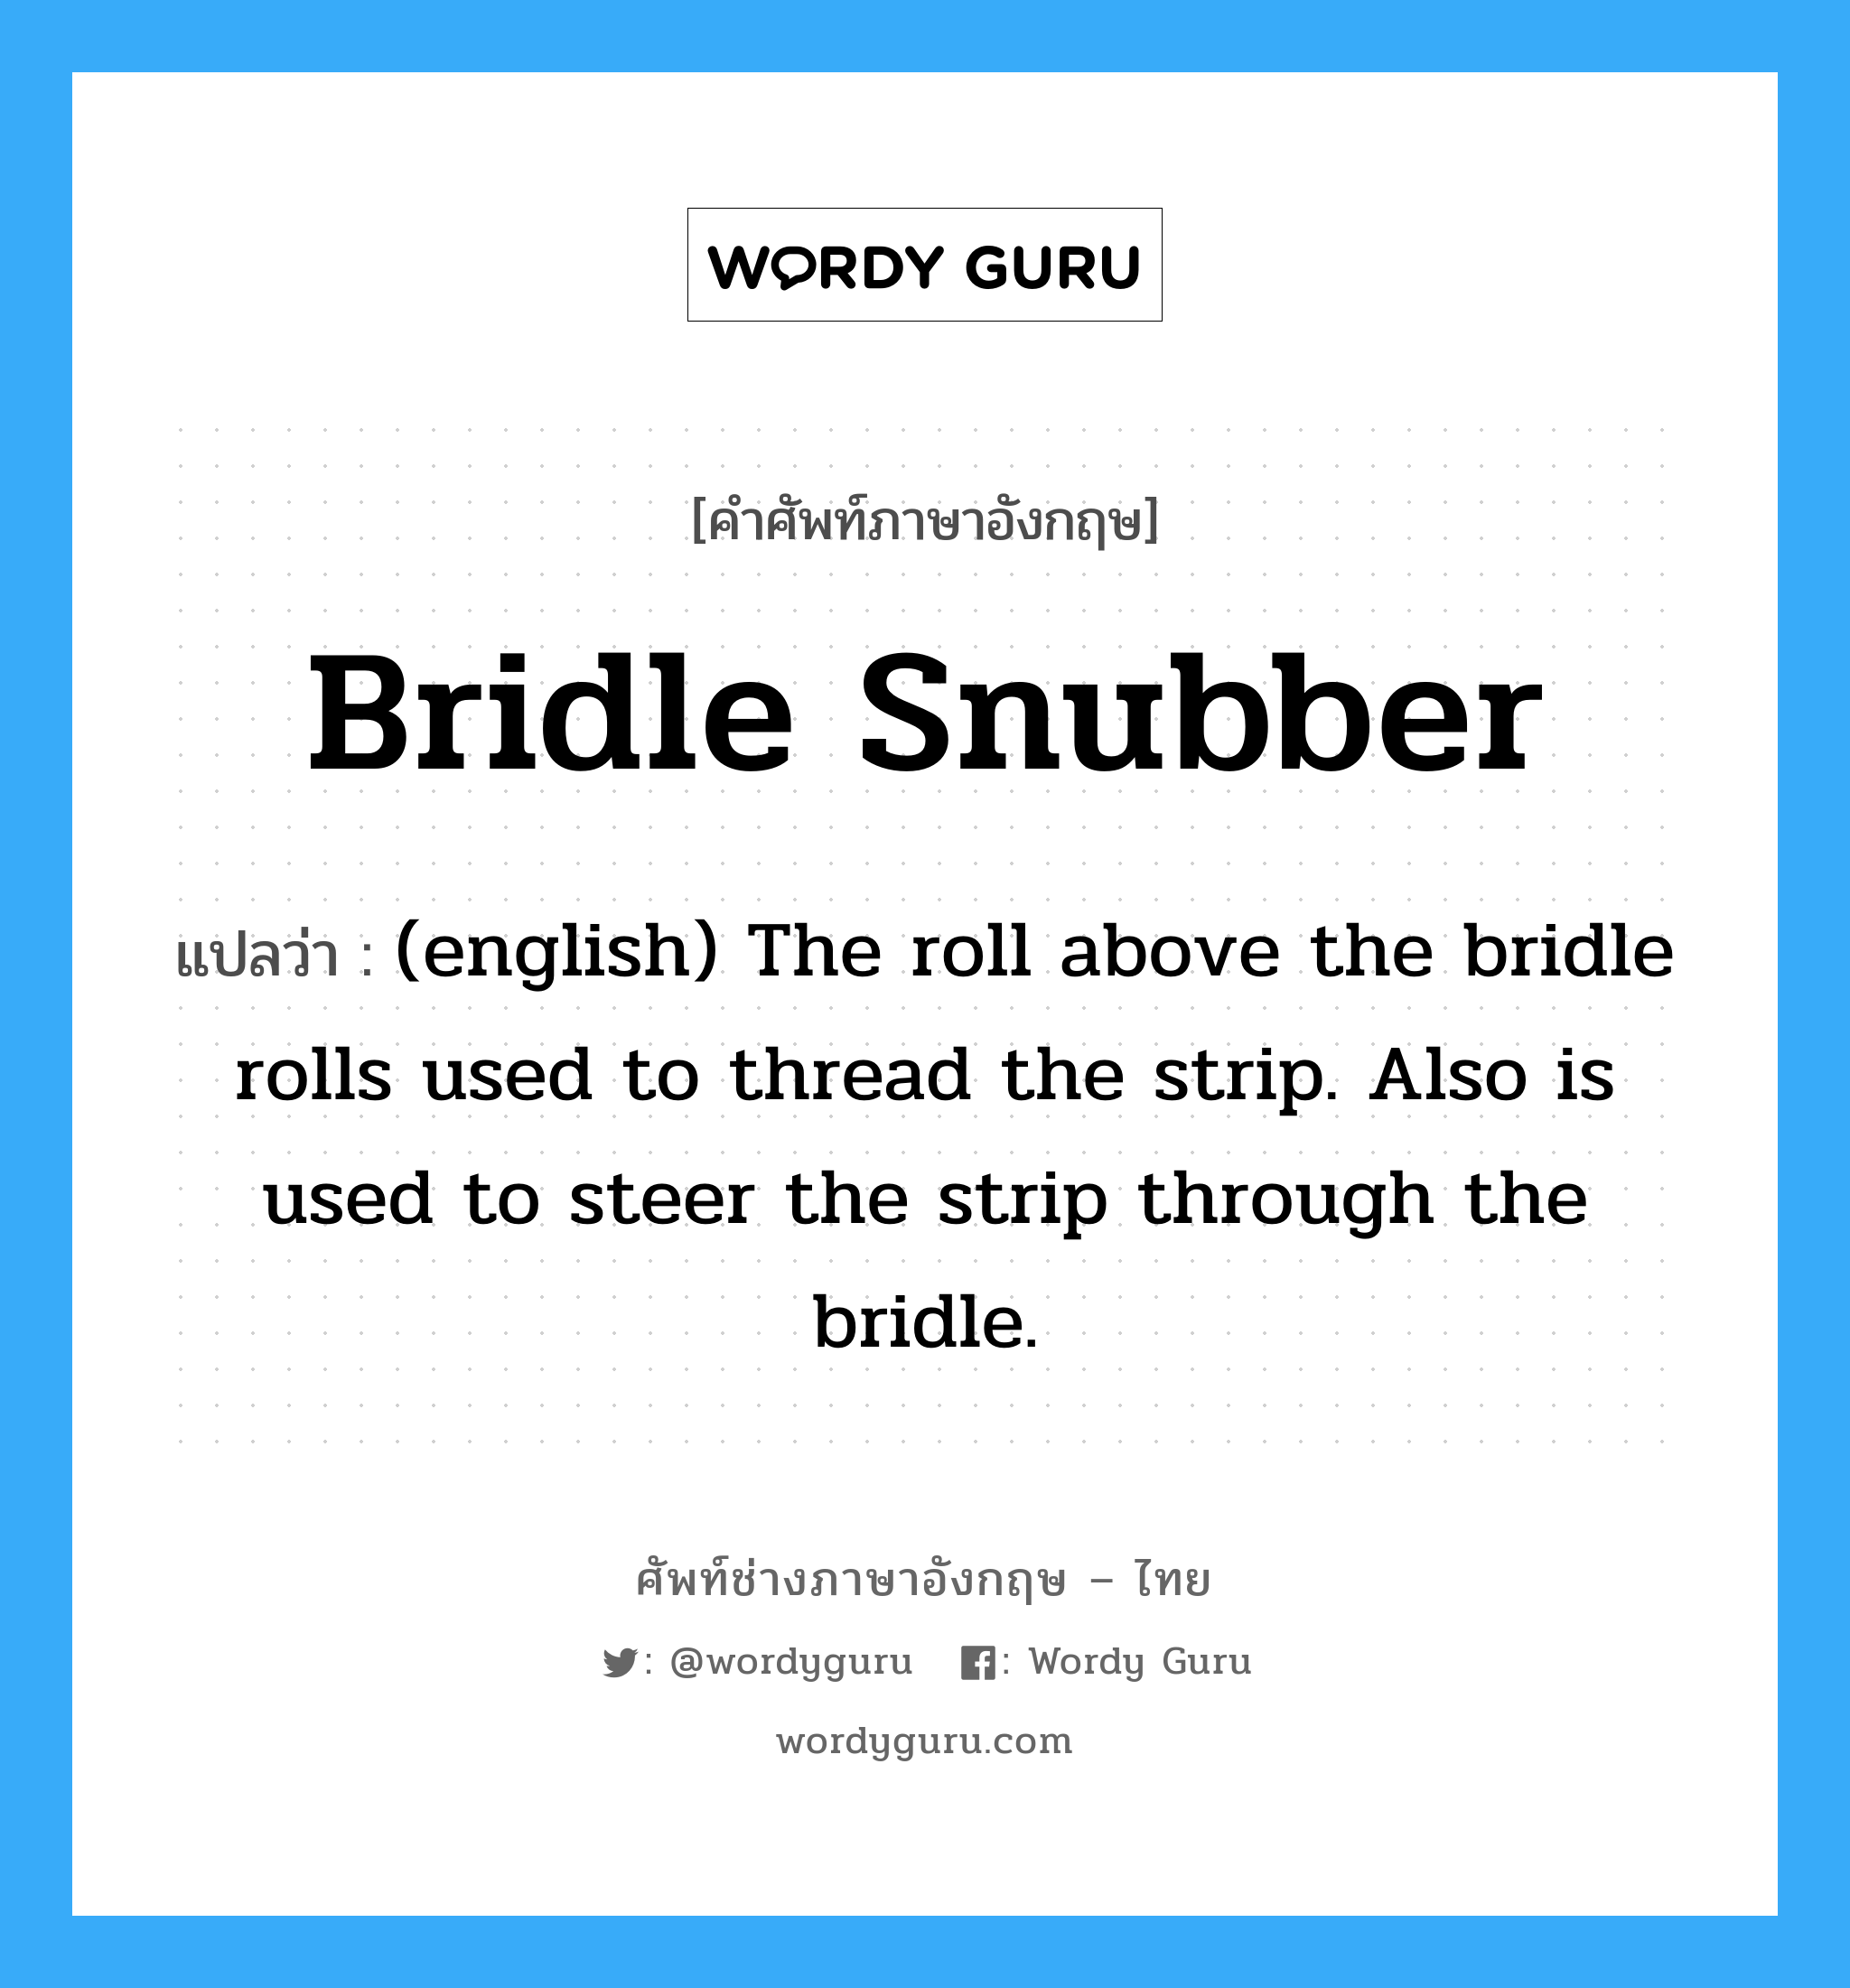 (english) The roll above the bridle rolls used to thread the strip. Also is used to steer the strip through the bridle. ภาษาอังกฤษ?, คำศัพท์ช่างภาษาอังกฤษ - ไทย (english) The roll above the bridle rolls used to thread the strip. Also is used to steer the strip through the bridle. คำศัพท์ภาษาอังกฤษ (english) The roll above the bridle rolls used to thread the strip. Also is used to steer the strip through the bridle. แปลว่า Bridle Snubber